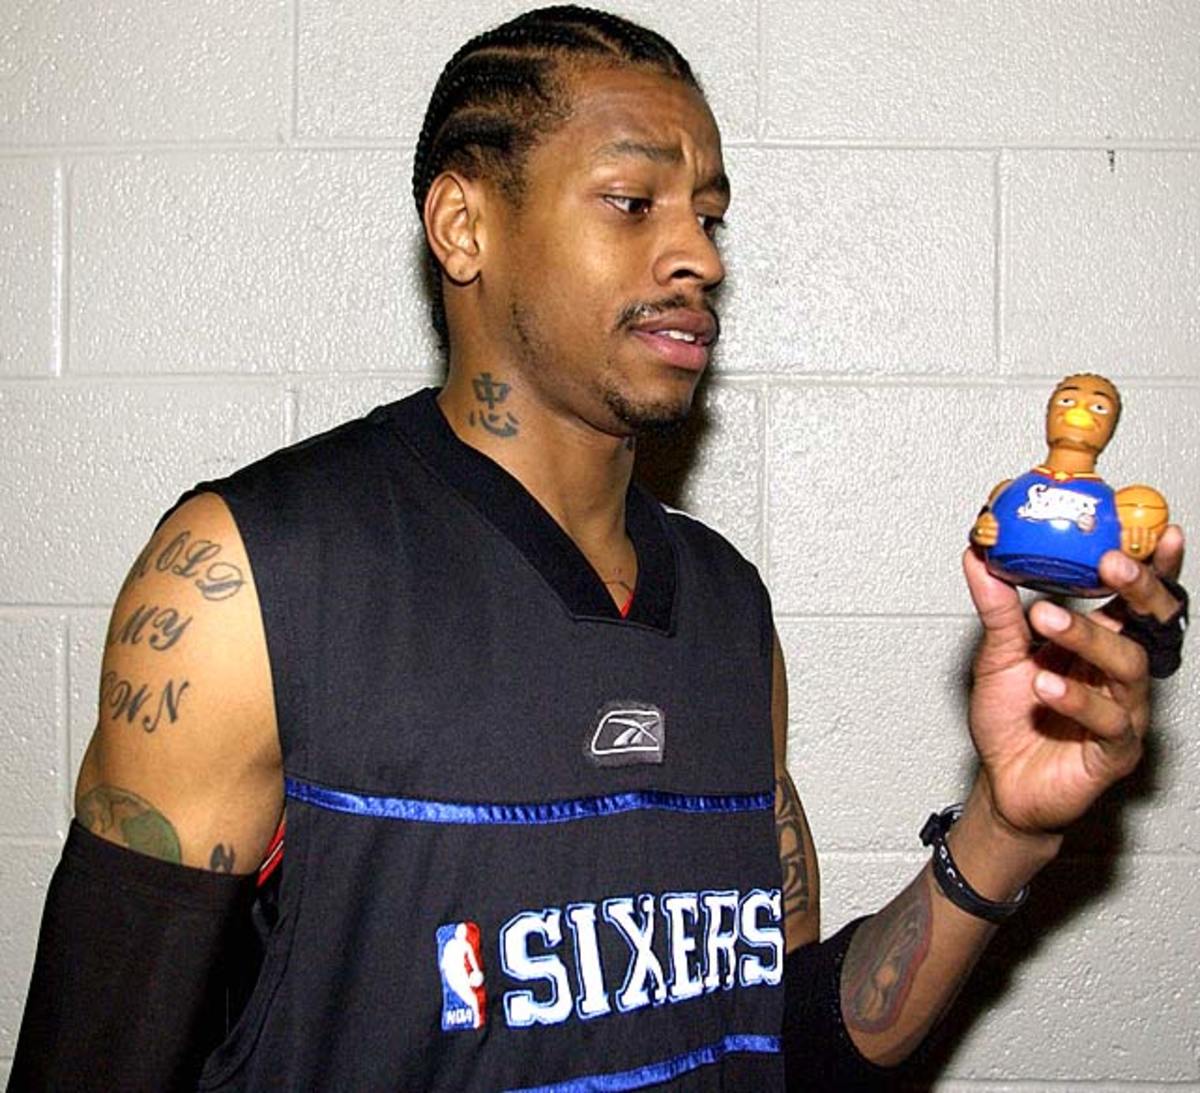 Remembering Allen Iverson's career - Sports Illustrated